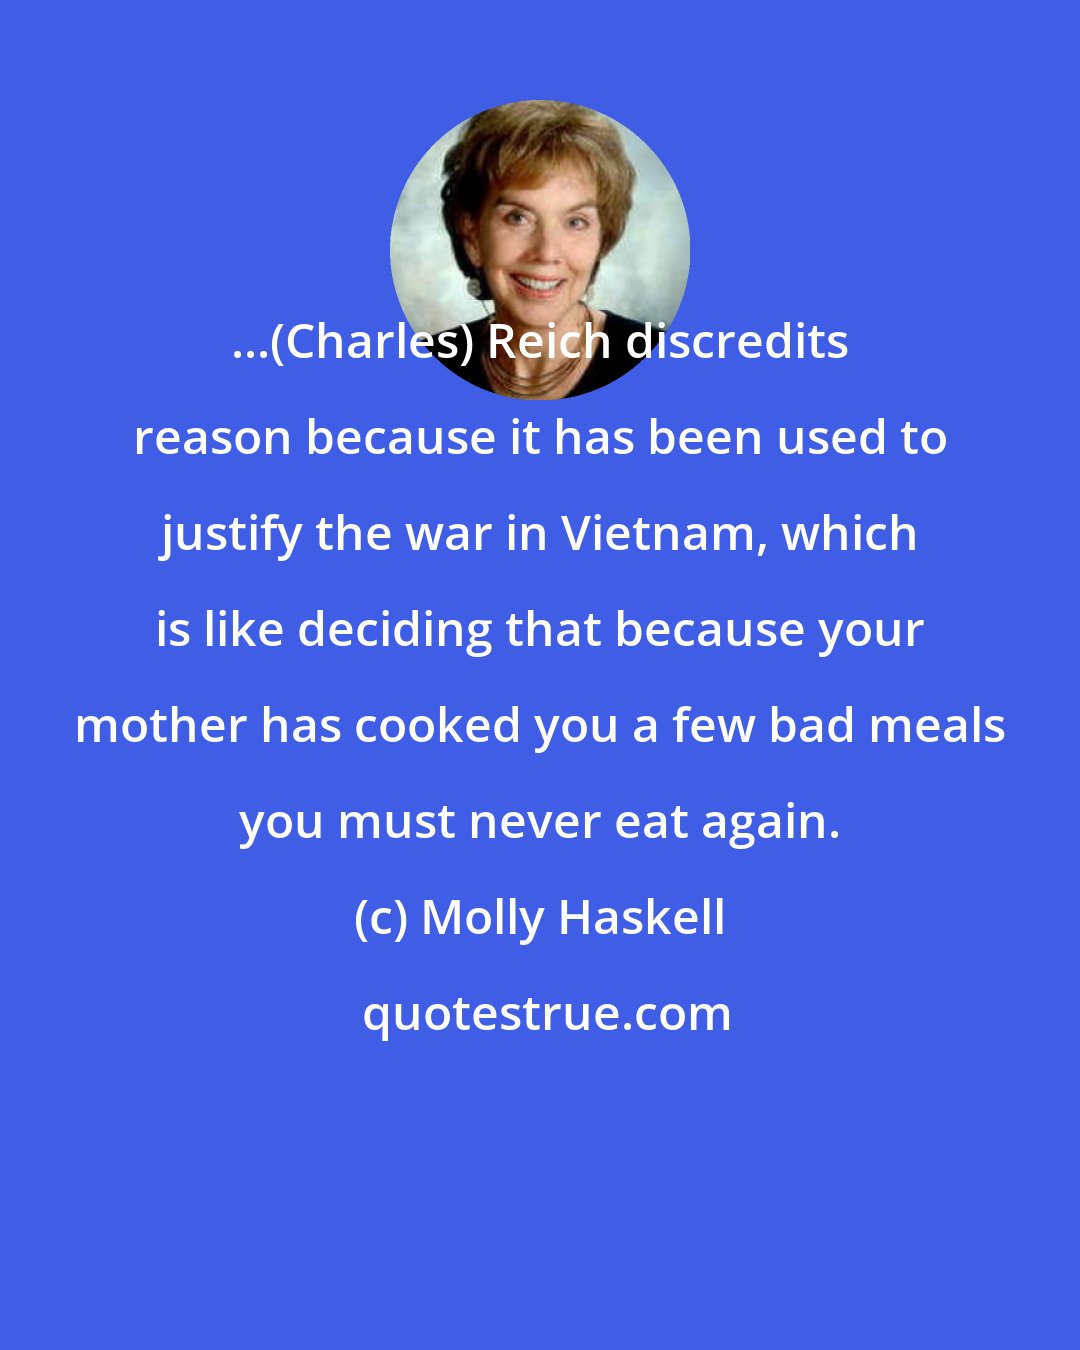 Molly Haskell: ...(Charles) Reich discredits reason because it has been used to justify the war in Vietnam, which is like deciding that because your mother has cooked you a few bad meals you must never eat again.